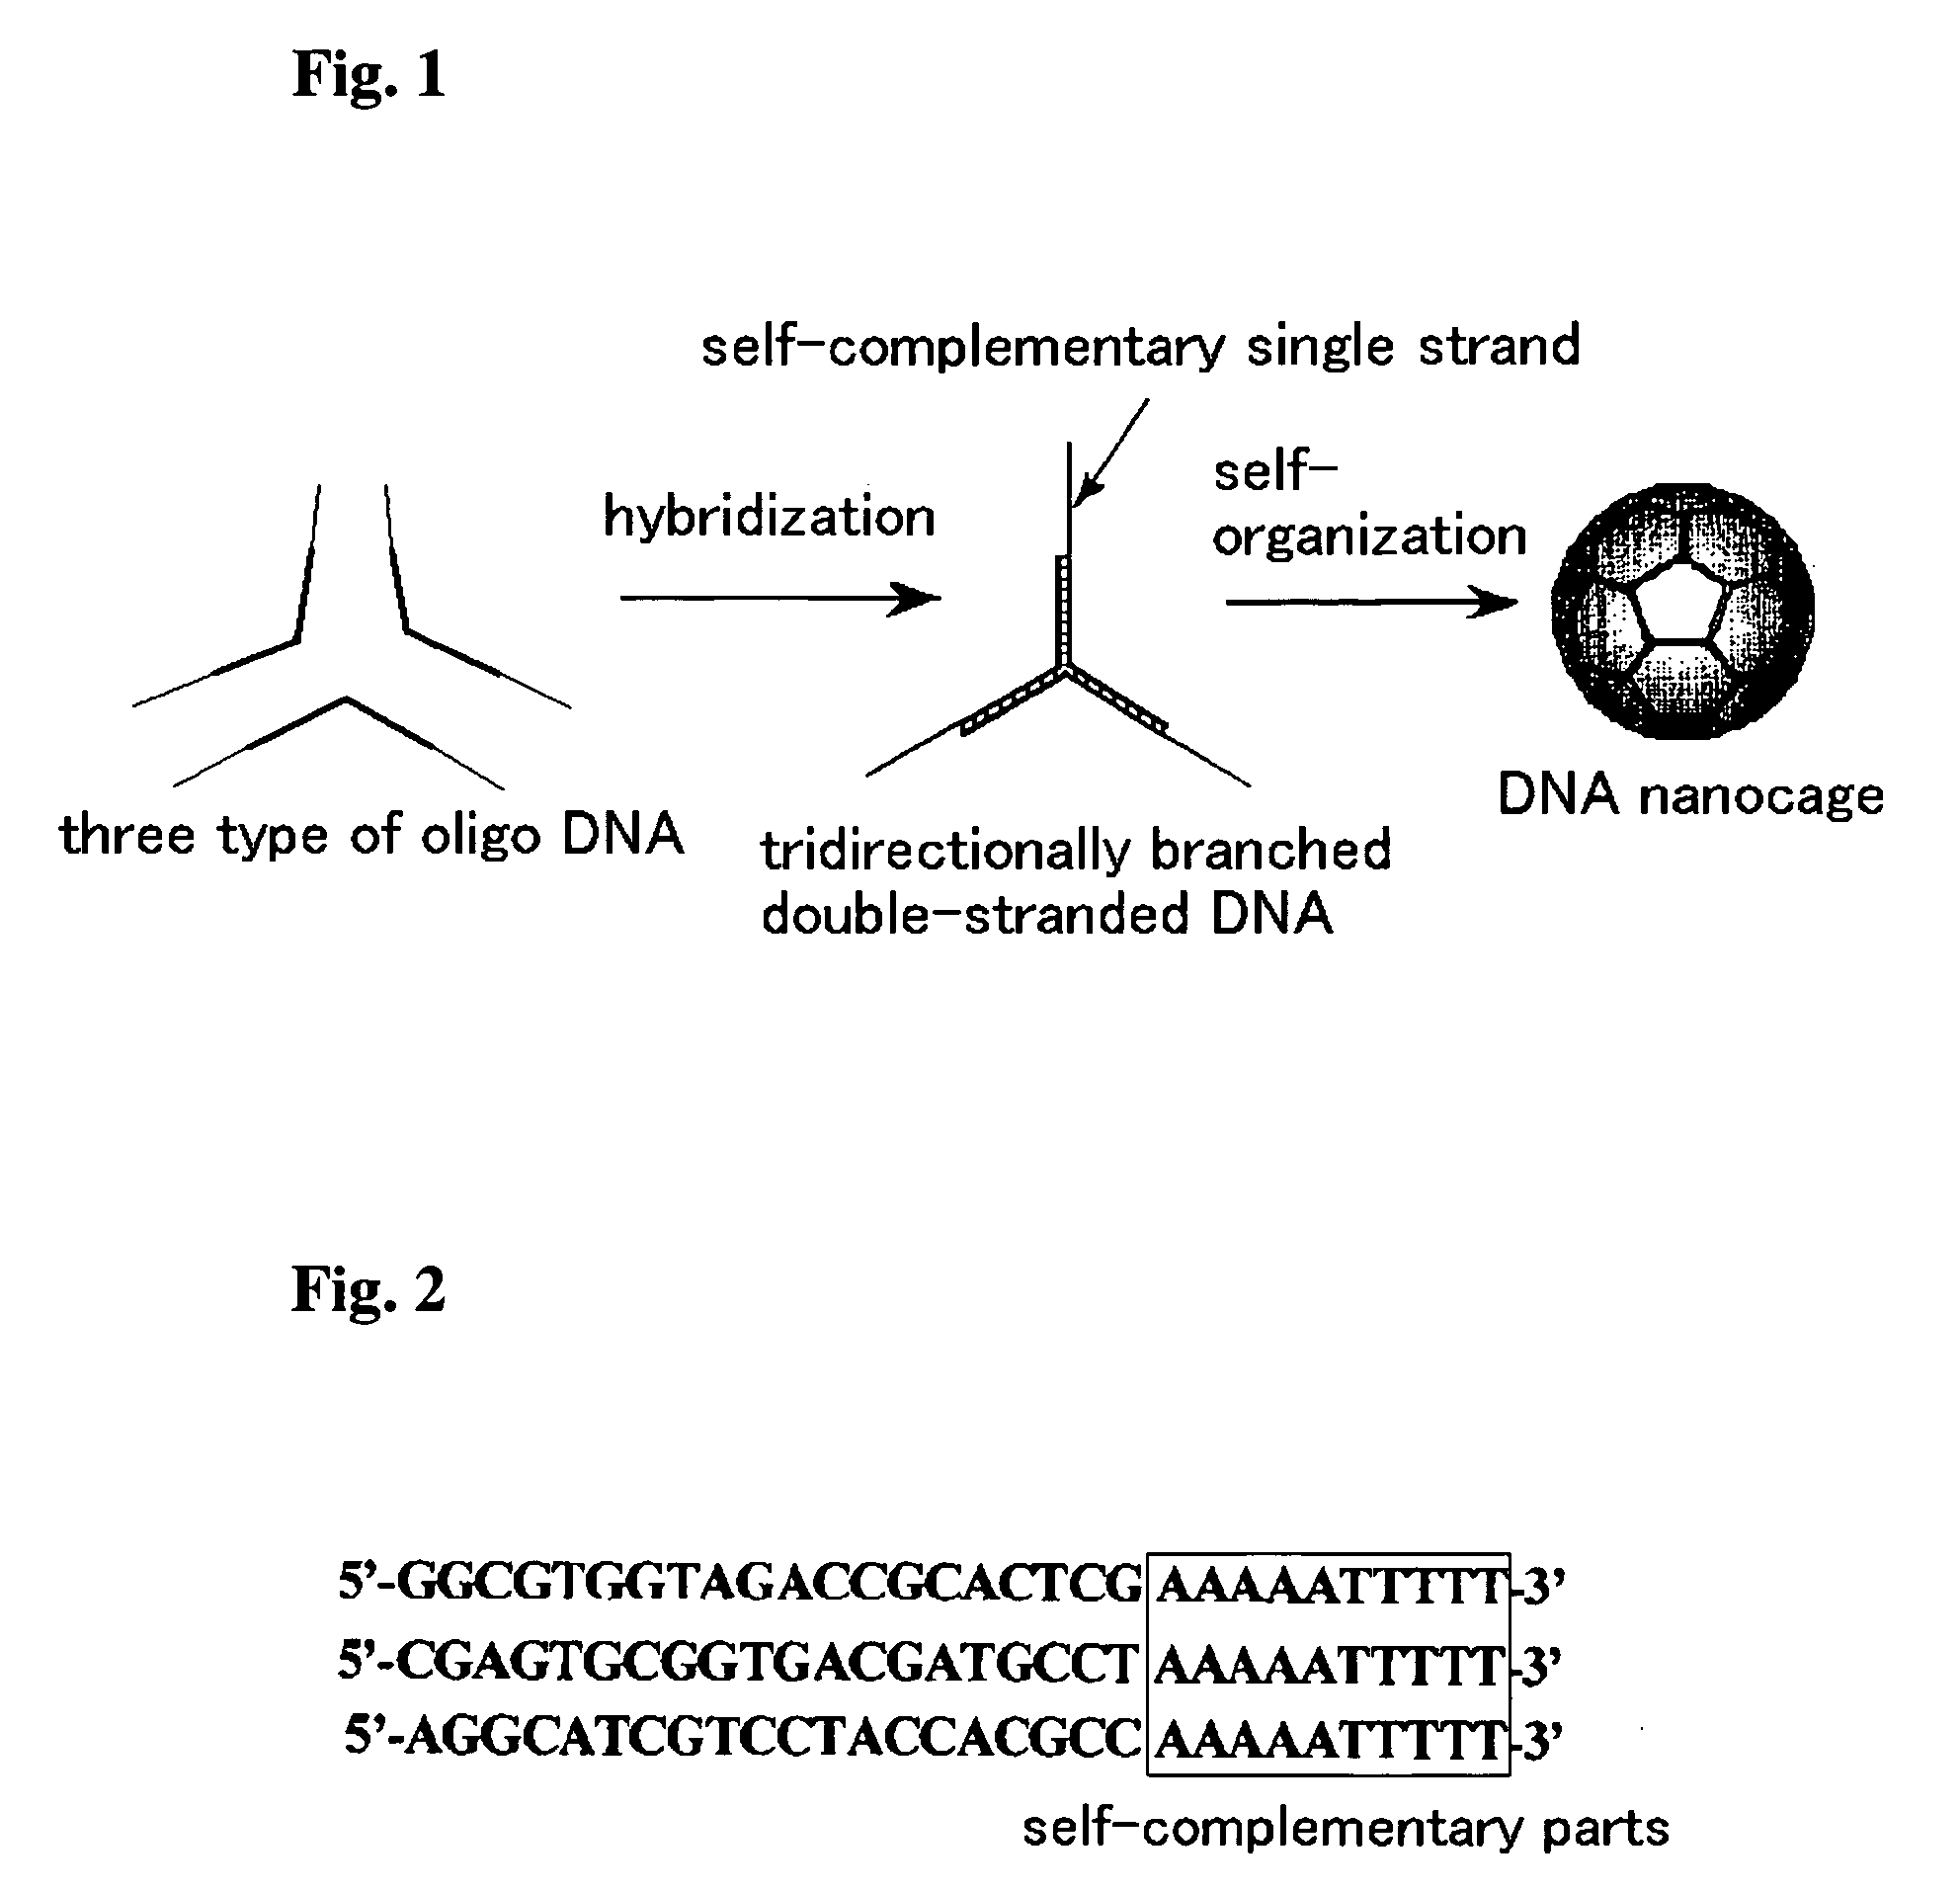 Dna nanocage by self-organization of dna and process for producing the same, and dna nanotube and molecule carrier using the same